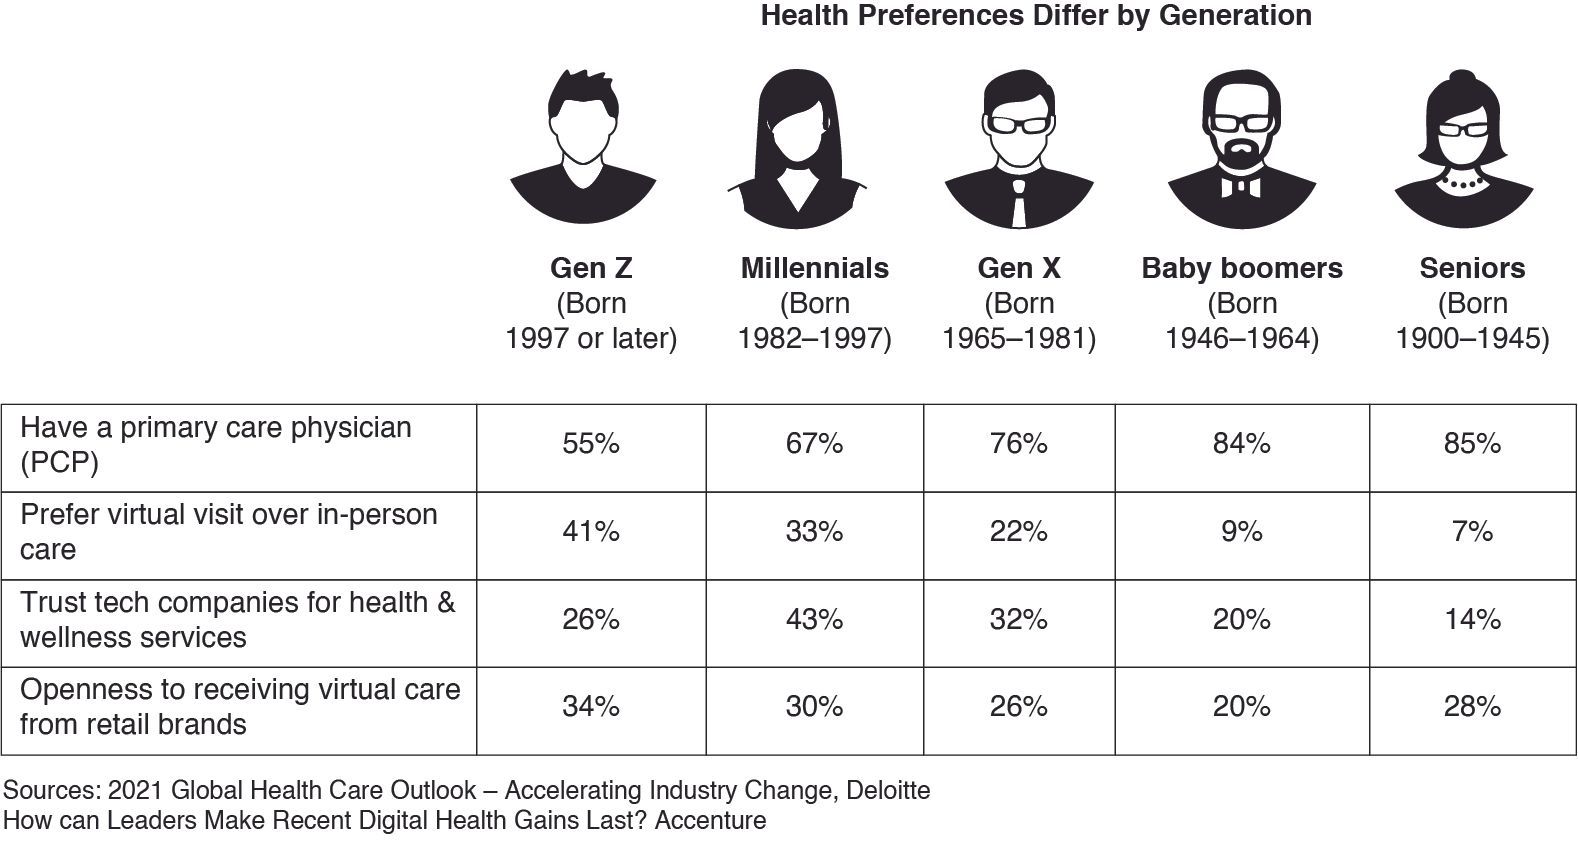 Health Preferences Differ by Generation table.